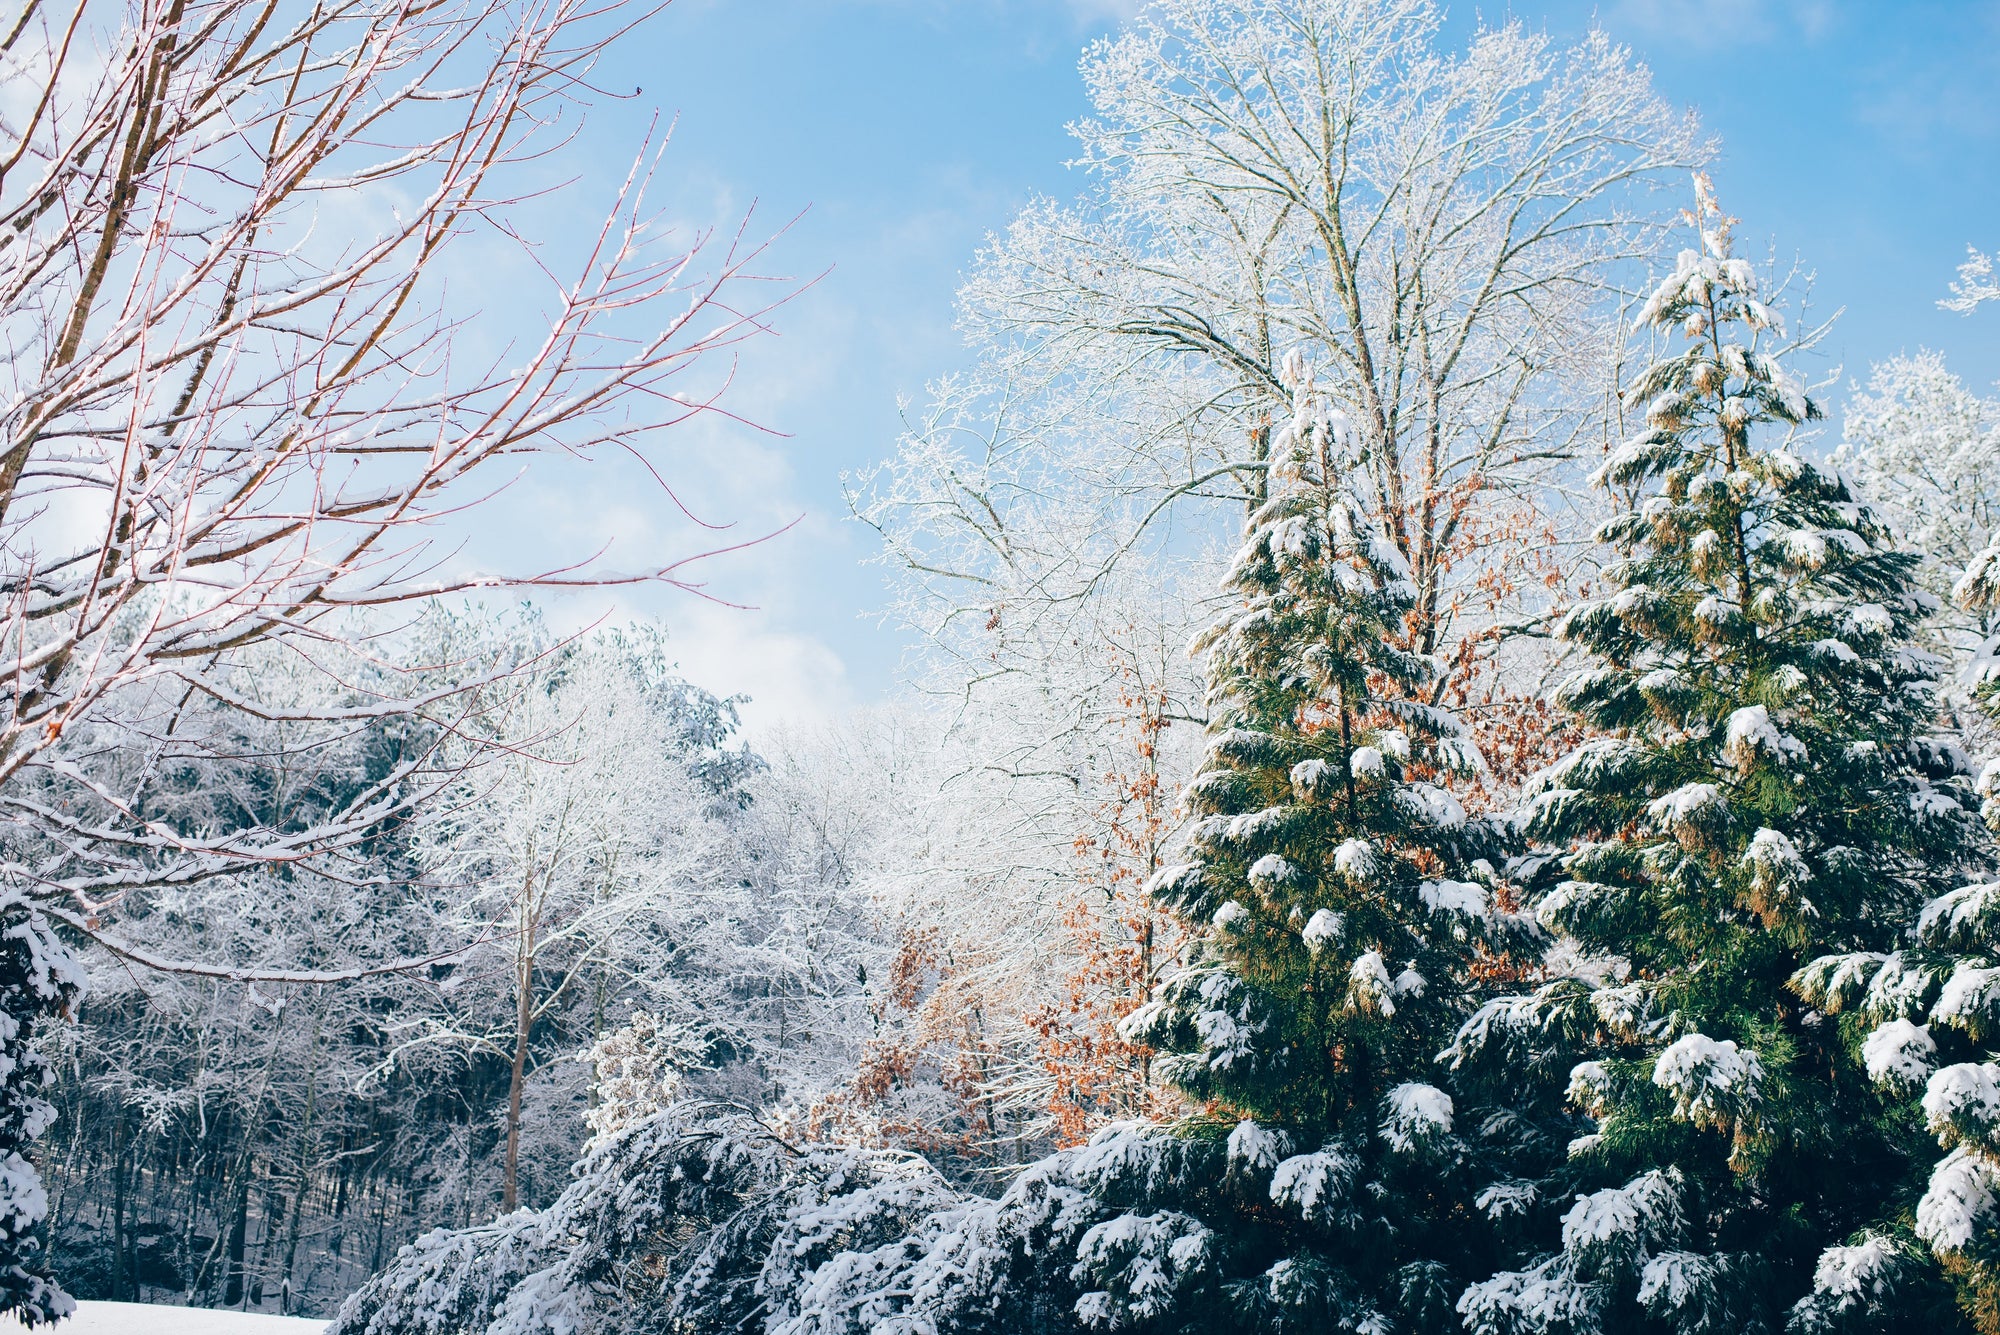 Our Top 5 Sustainable Winter Activities